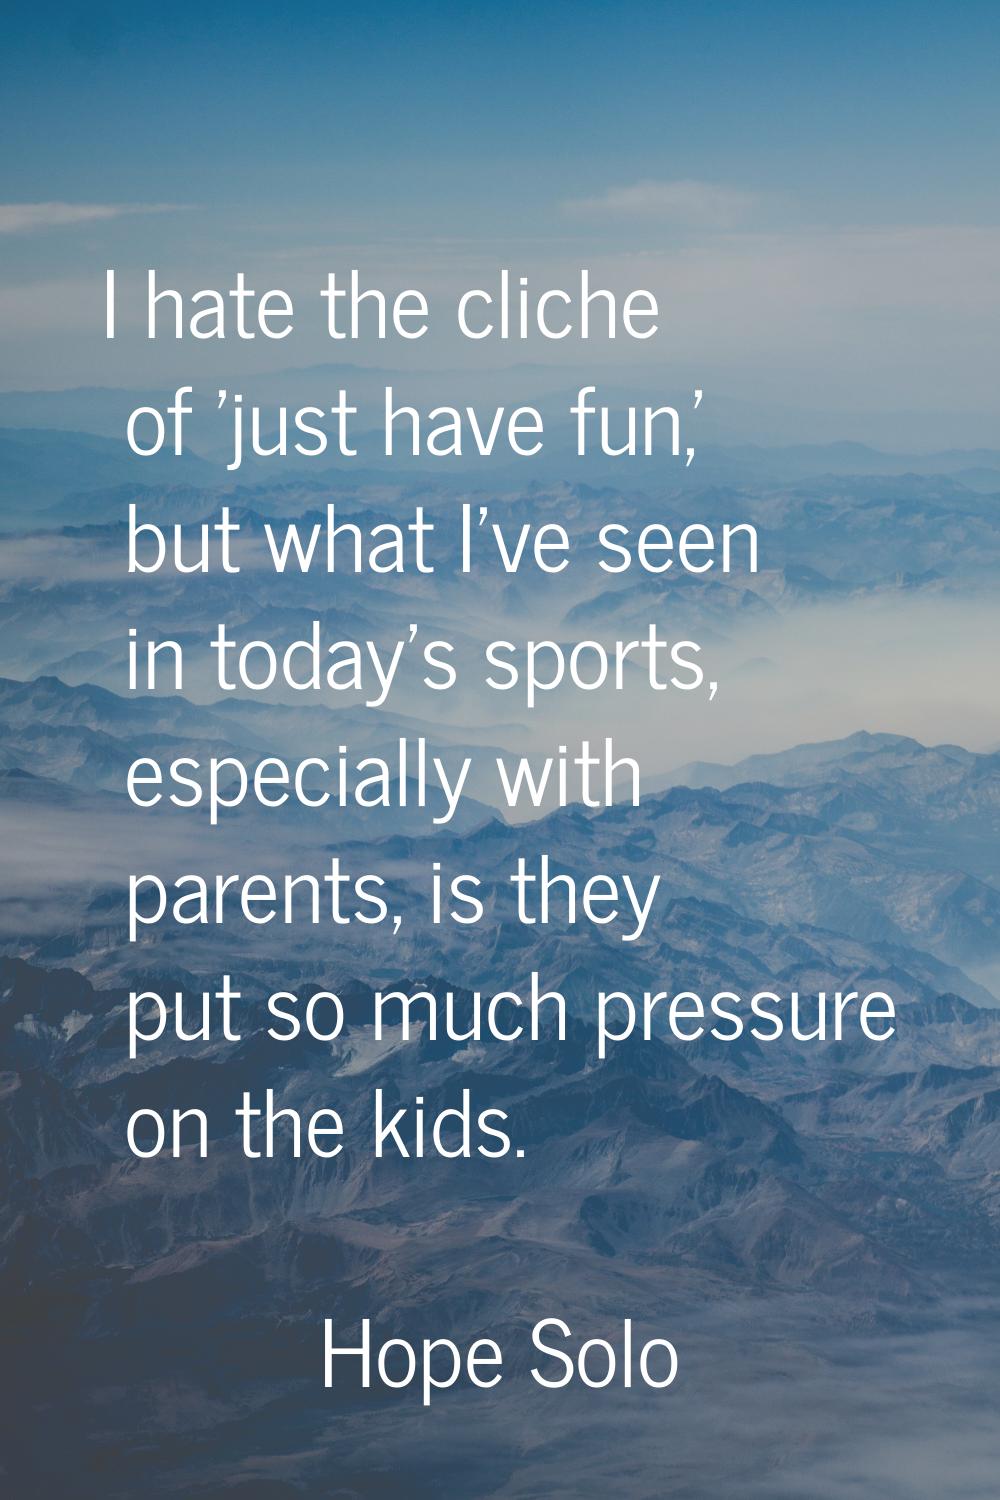 I hate the cliche of 'just have fun,' but what I've seen in today's sports, especially with parents